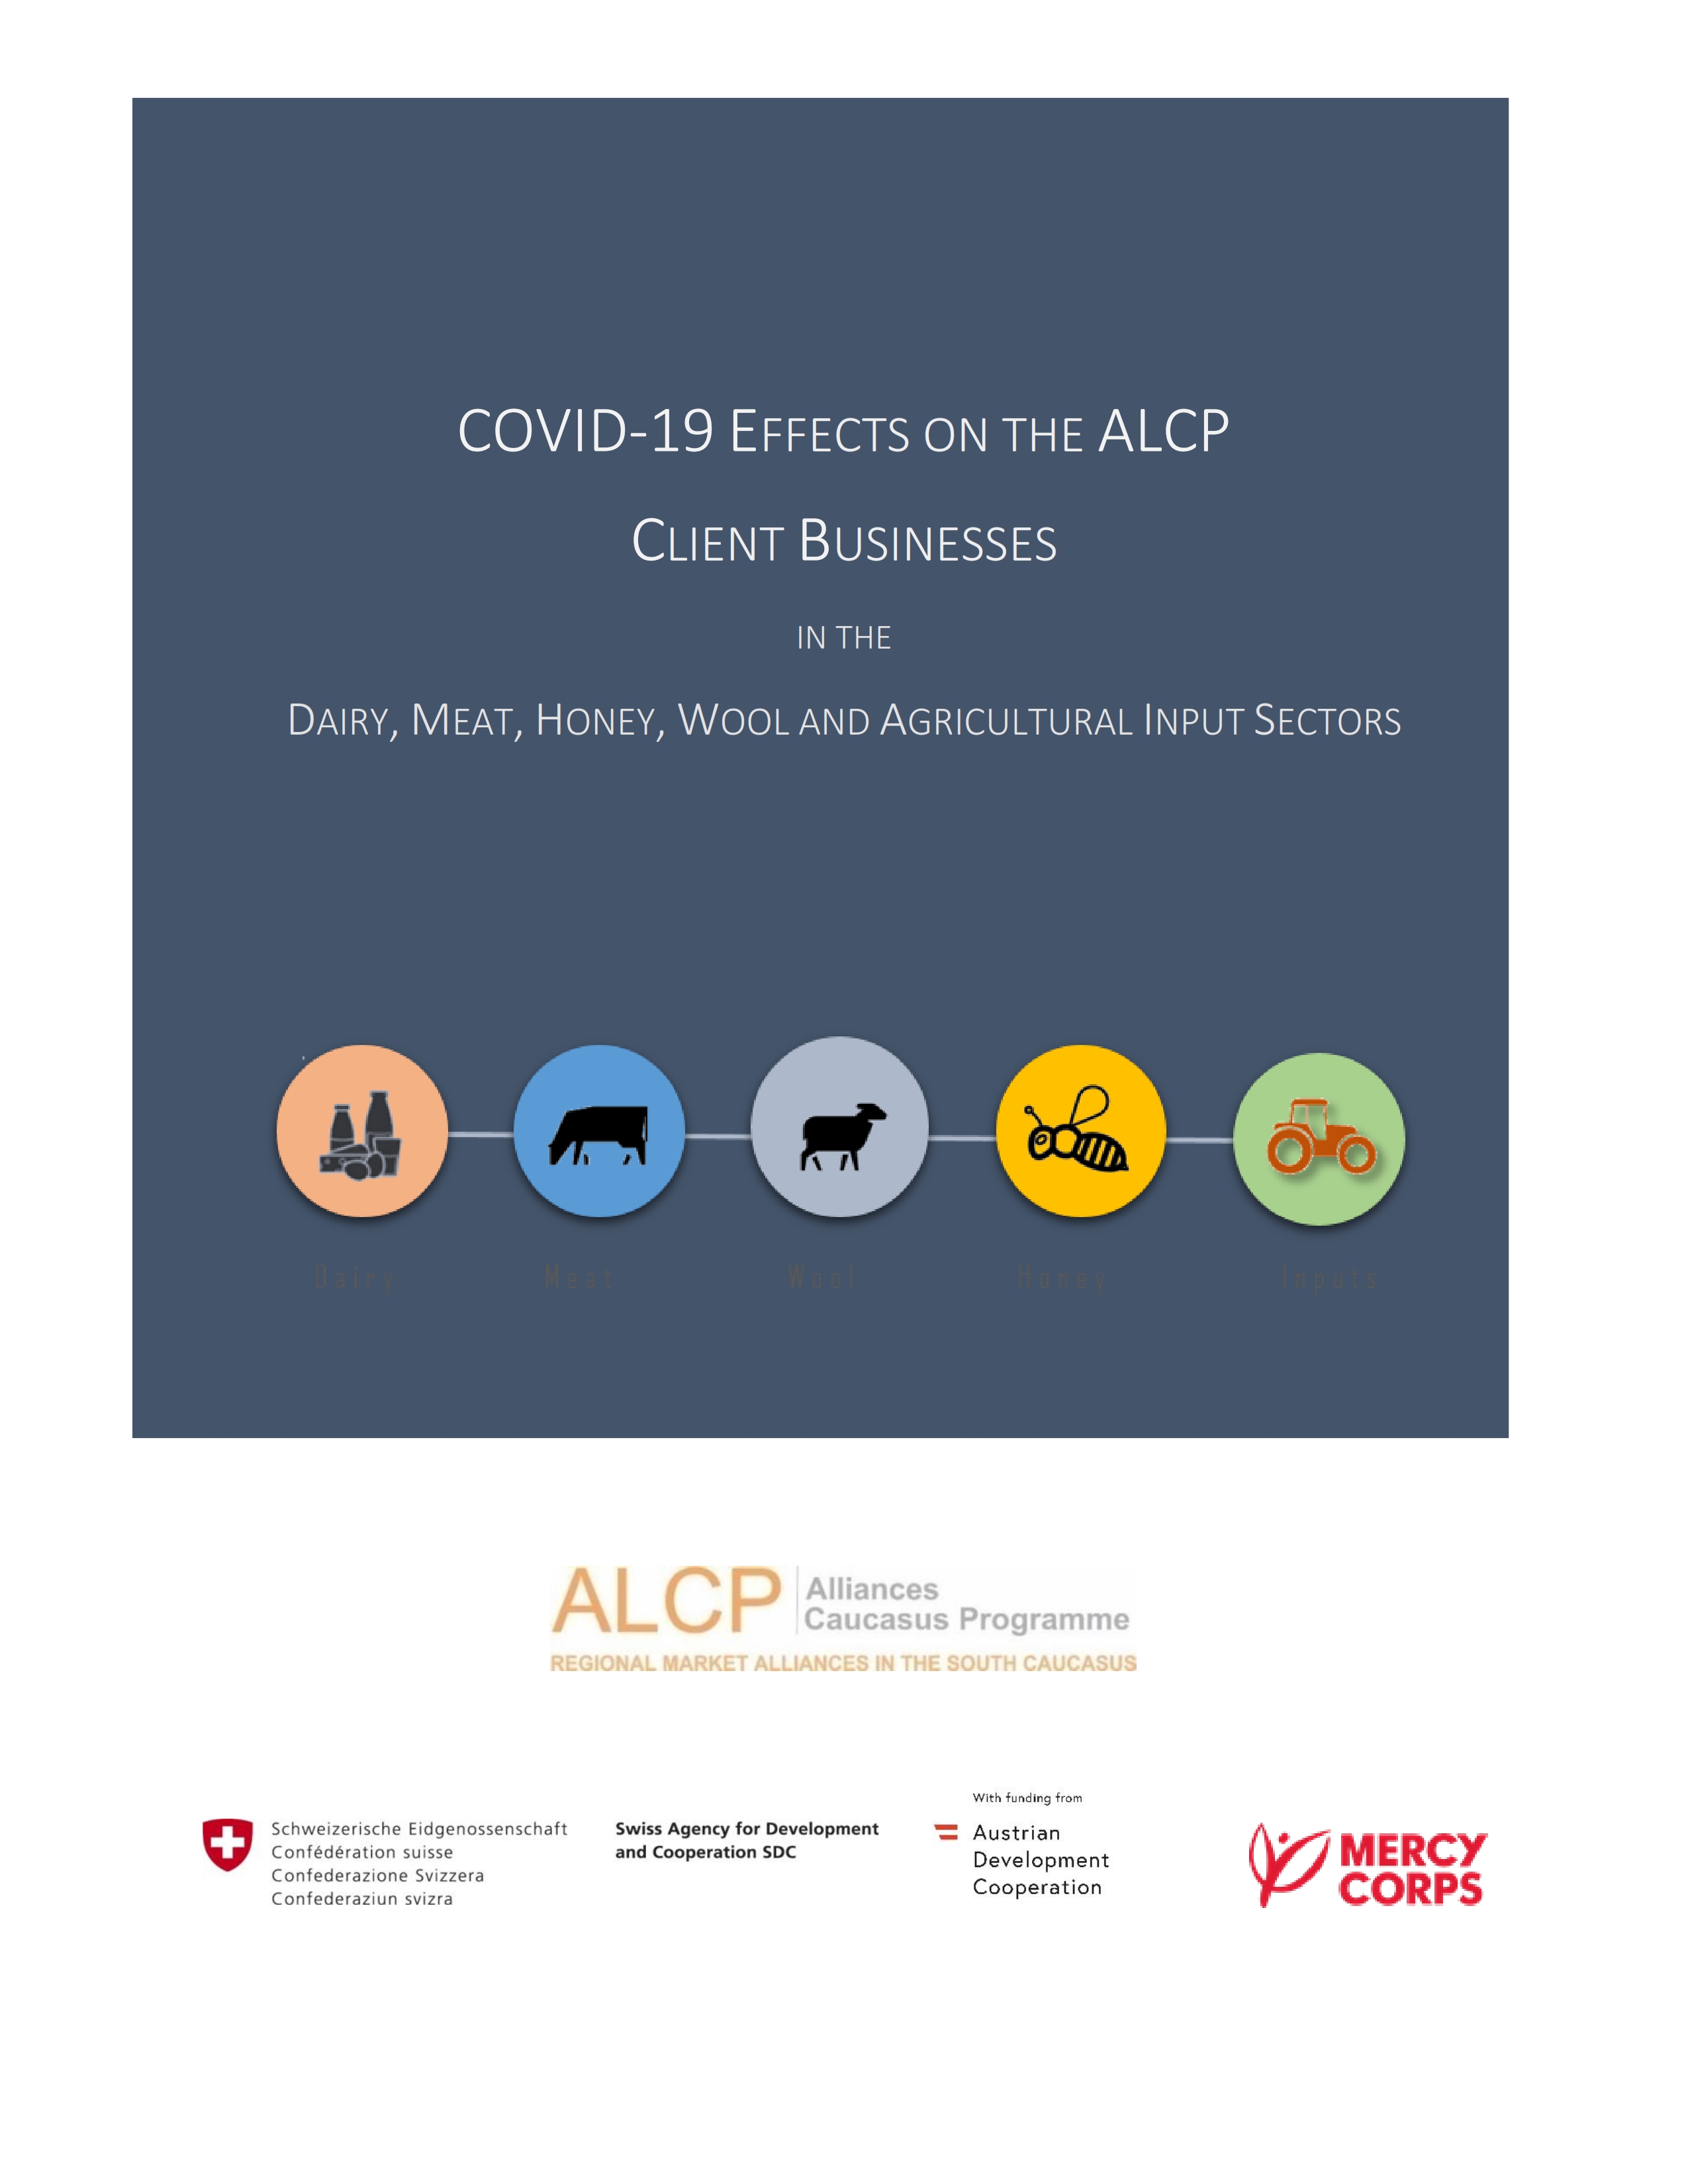 COVID 19 Effects on ALCP Businesses